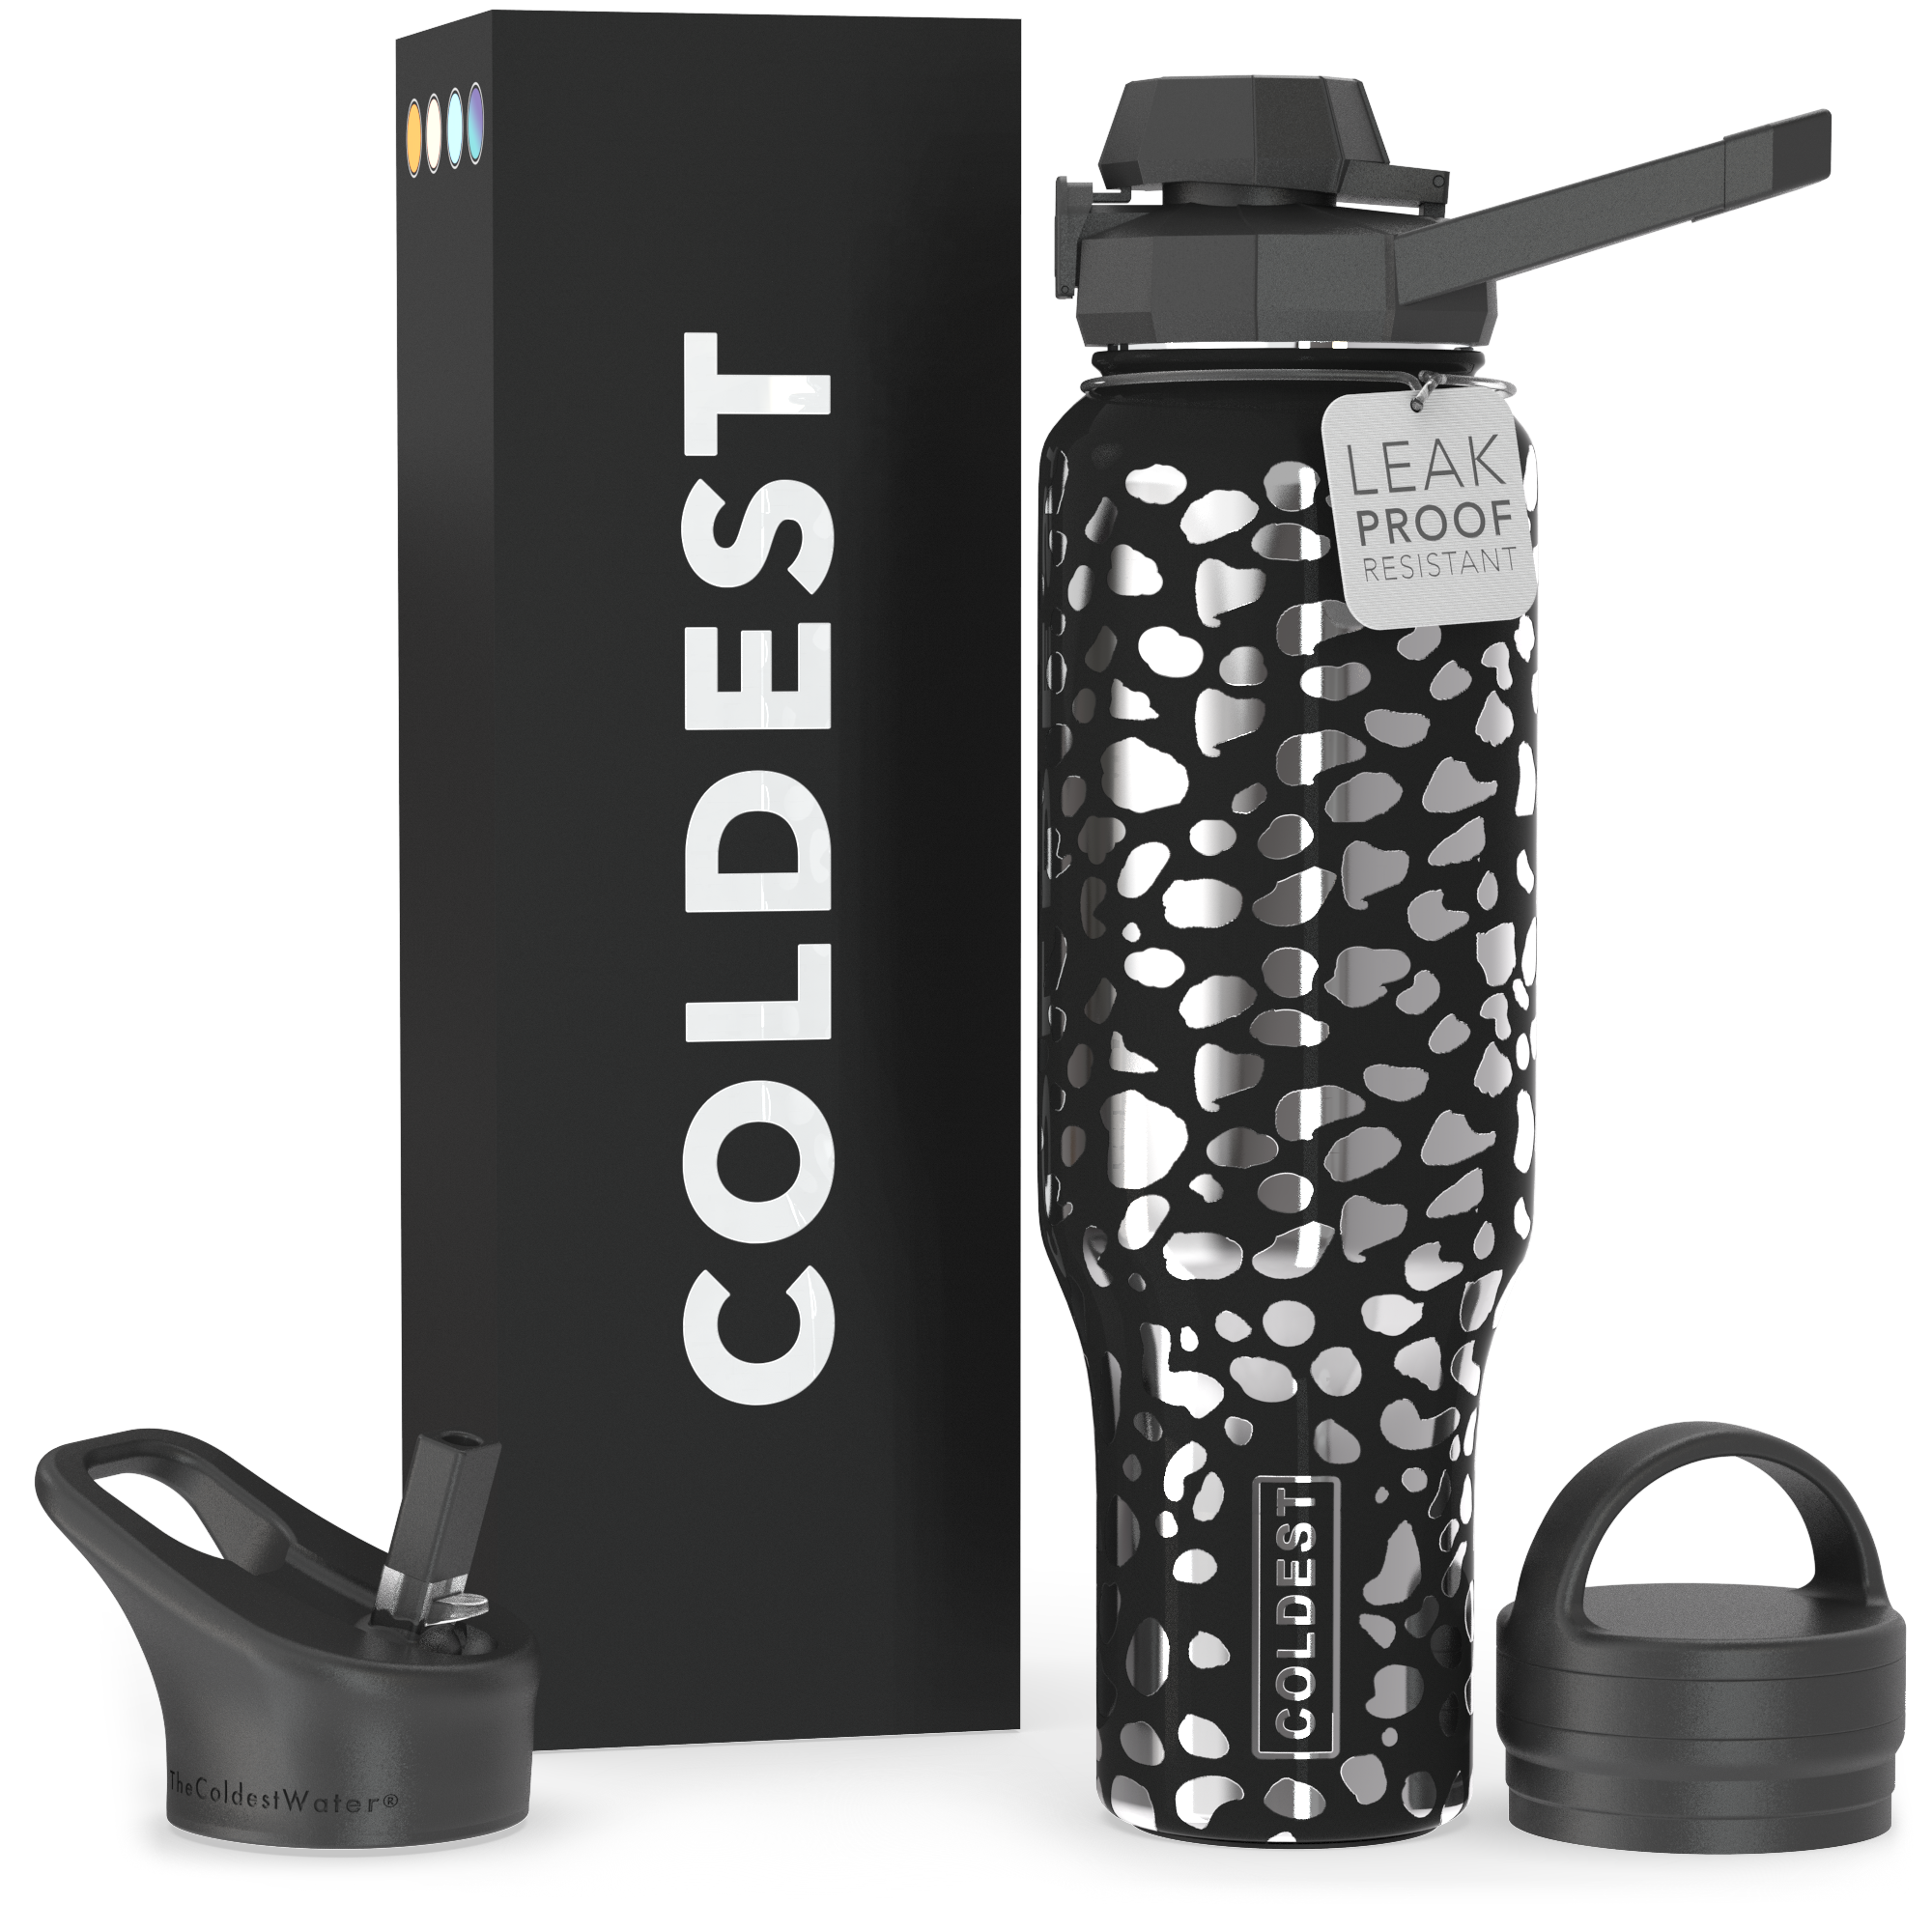 Stainless Steel Blender Bottle 24oz – Beyond Recovery